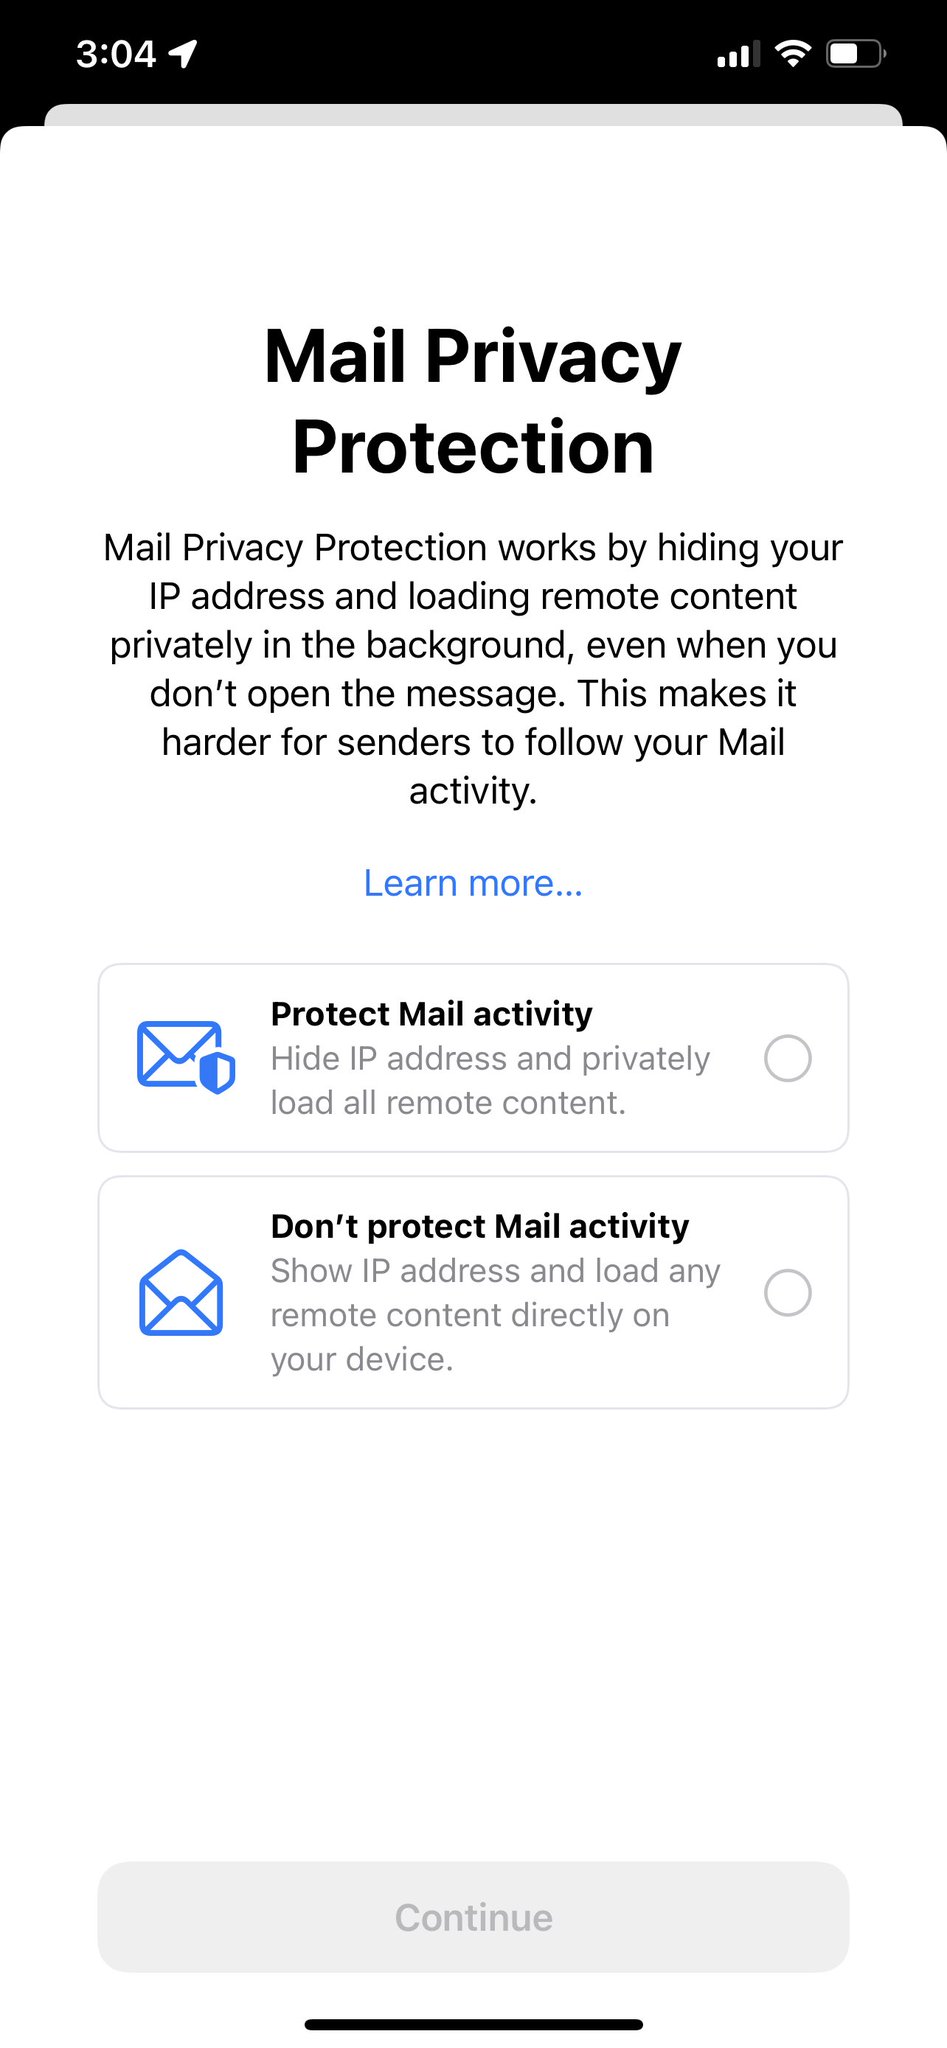 Mail Privacy Protection (MPP).